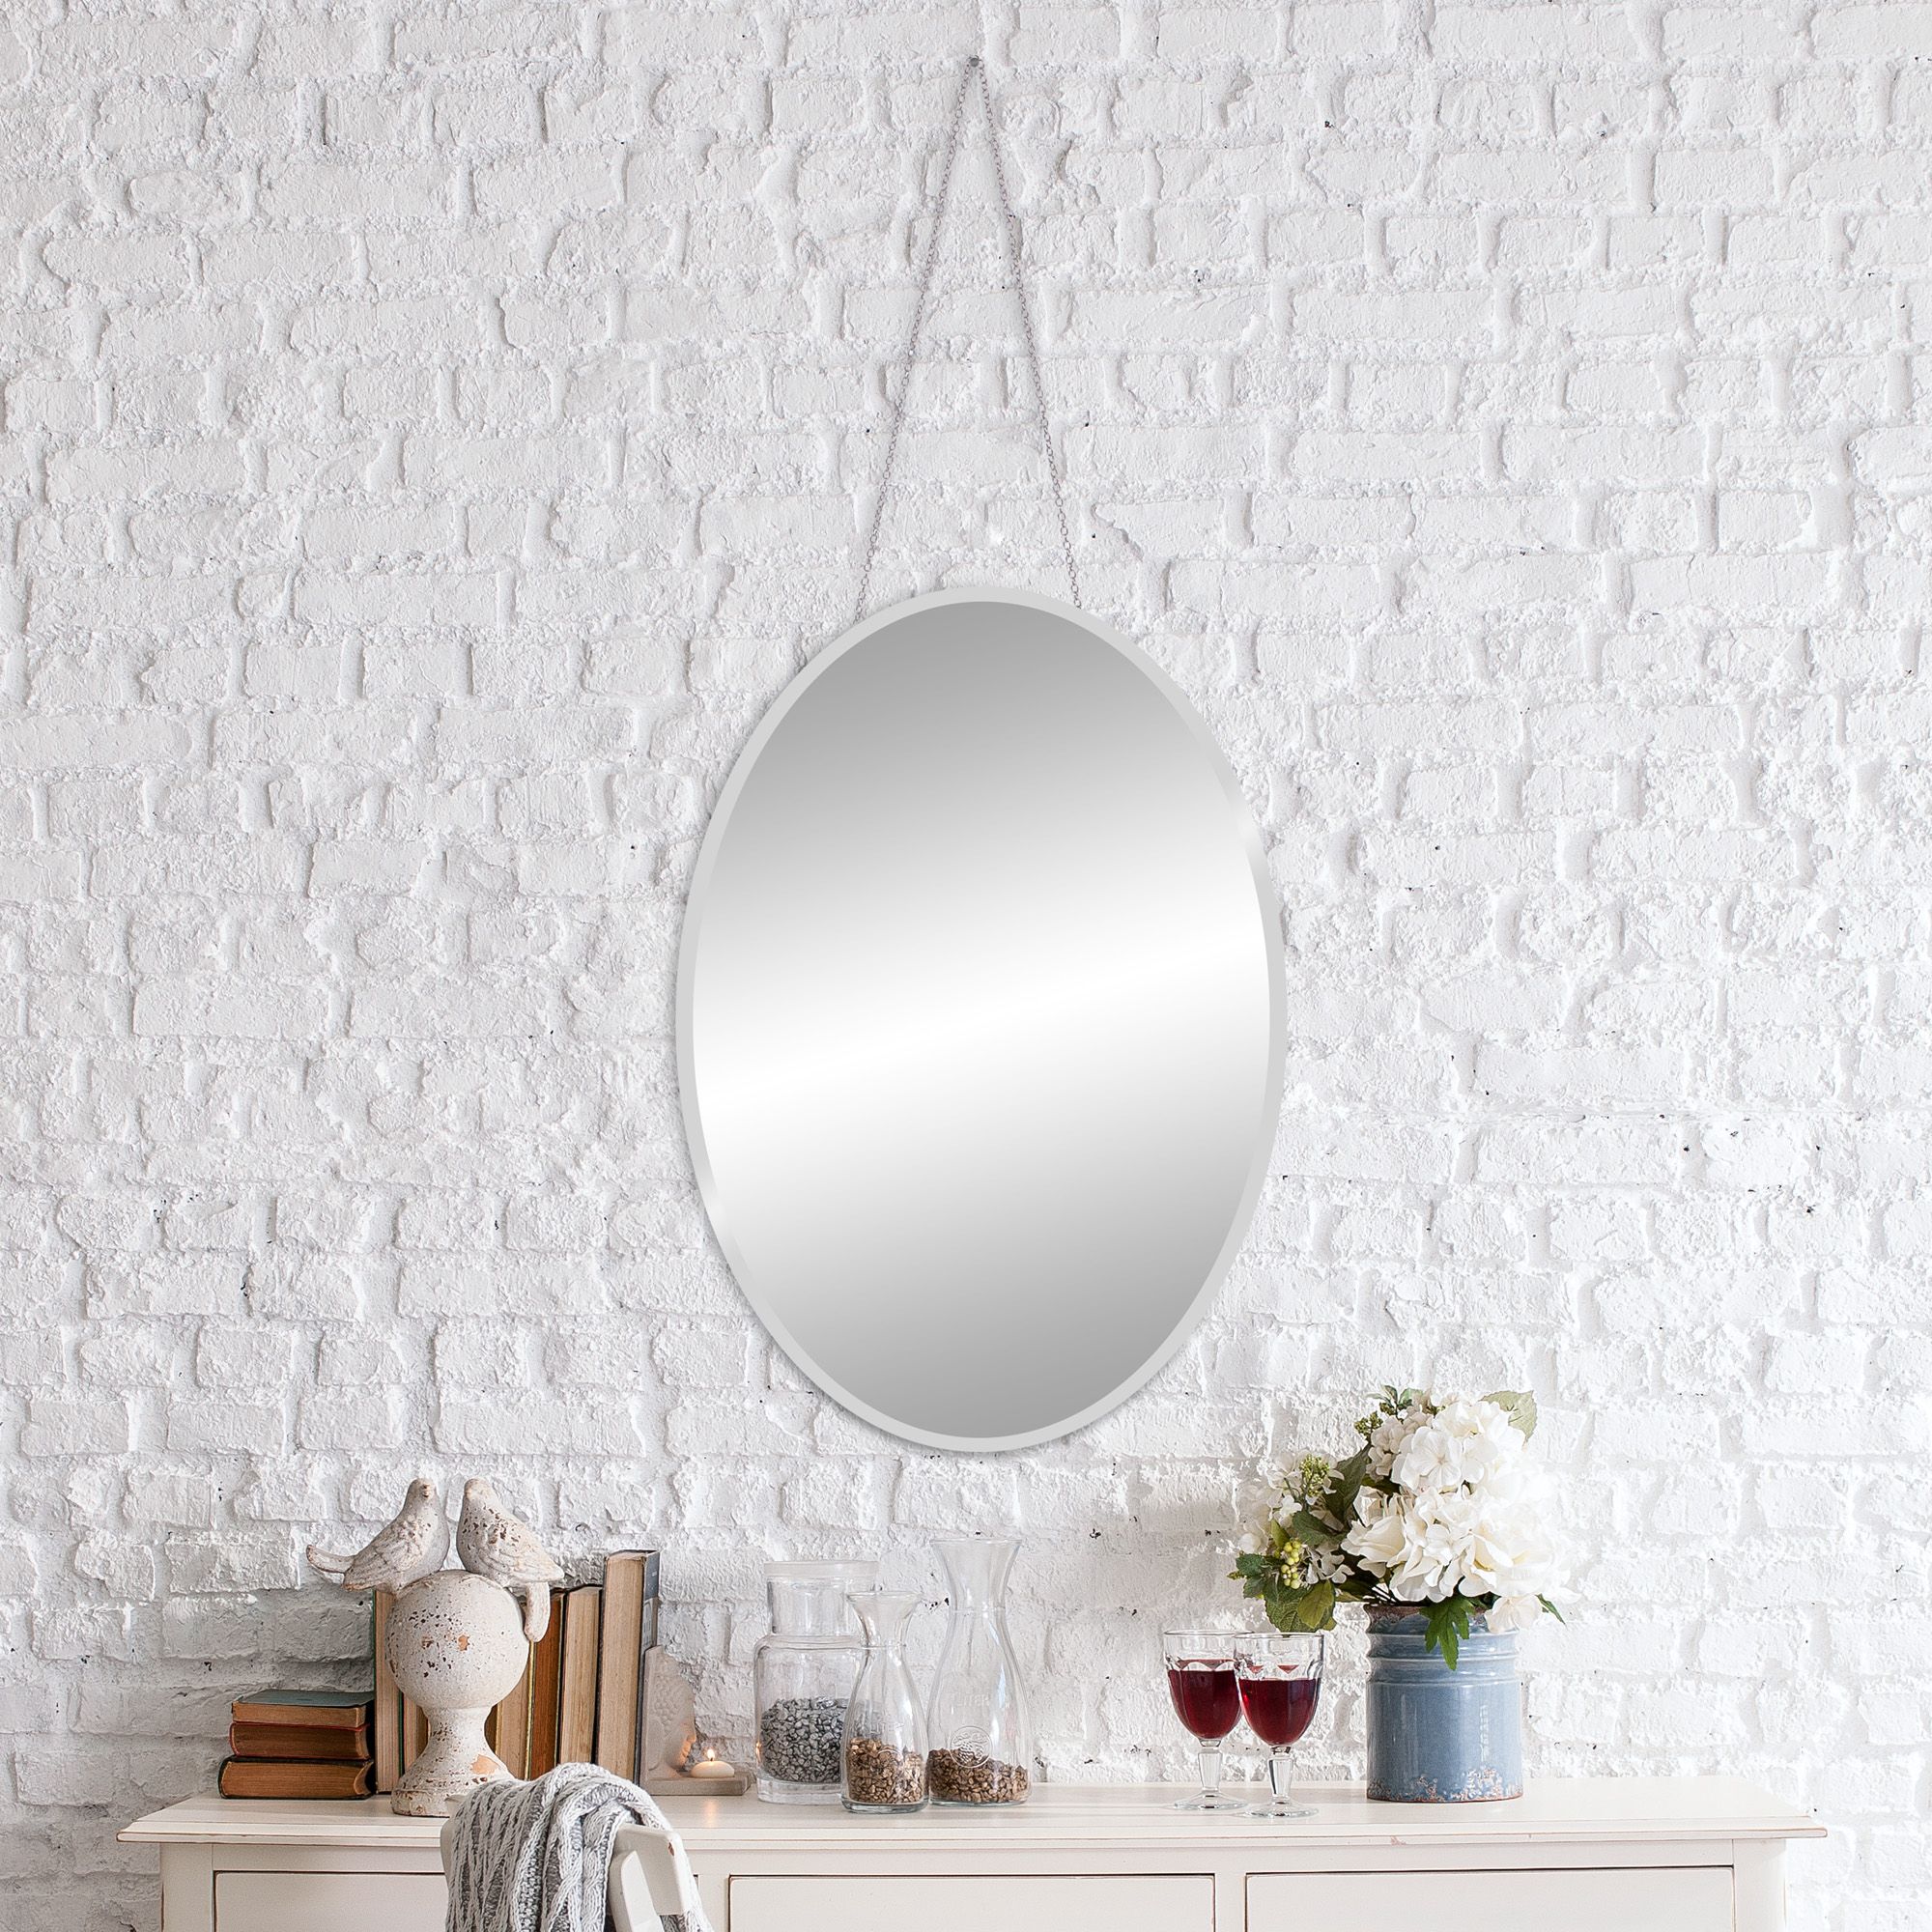 Patton Wall Decor 17x24 Frameless Beveled Oval Mirror With Hanging Pertaining To Thornbury Oval Bevel Frameless Wall Mirrors (Photo 5 of 15)